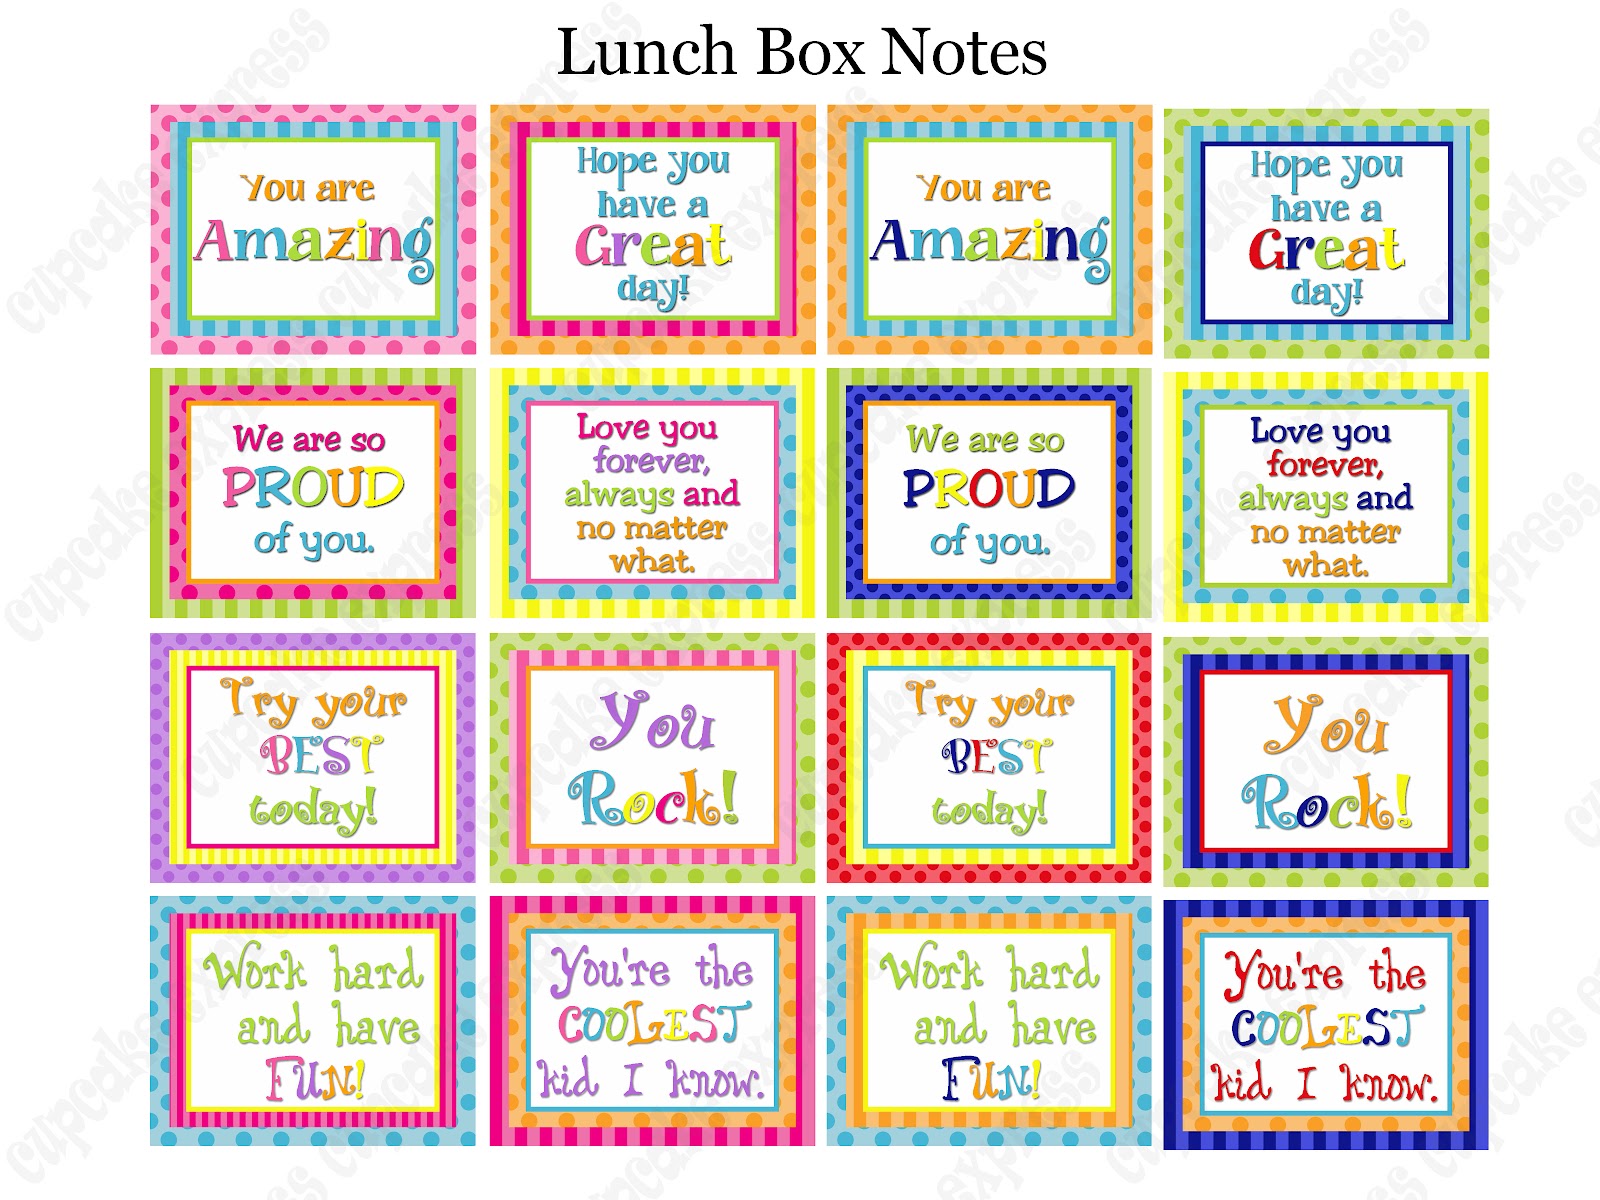 lunch-box-notes-kids-tyredsanfrancisco